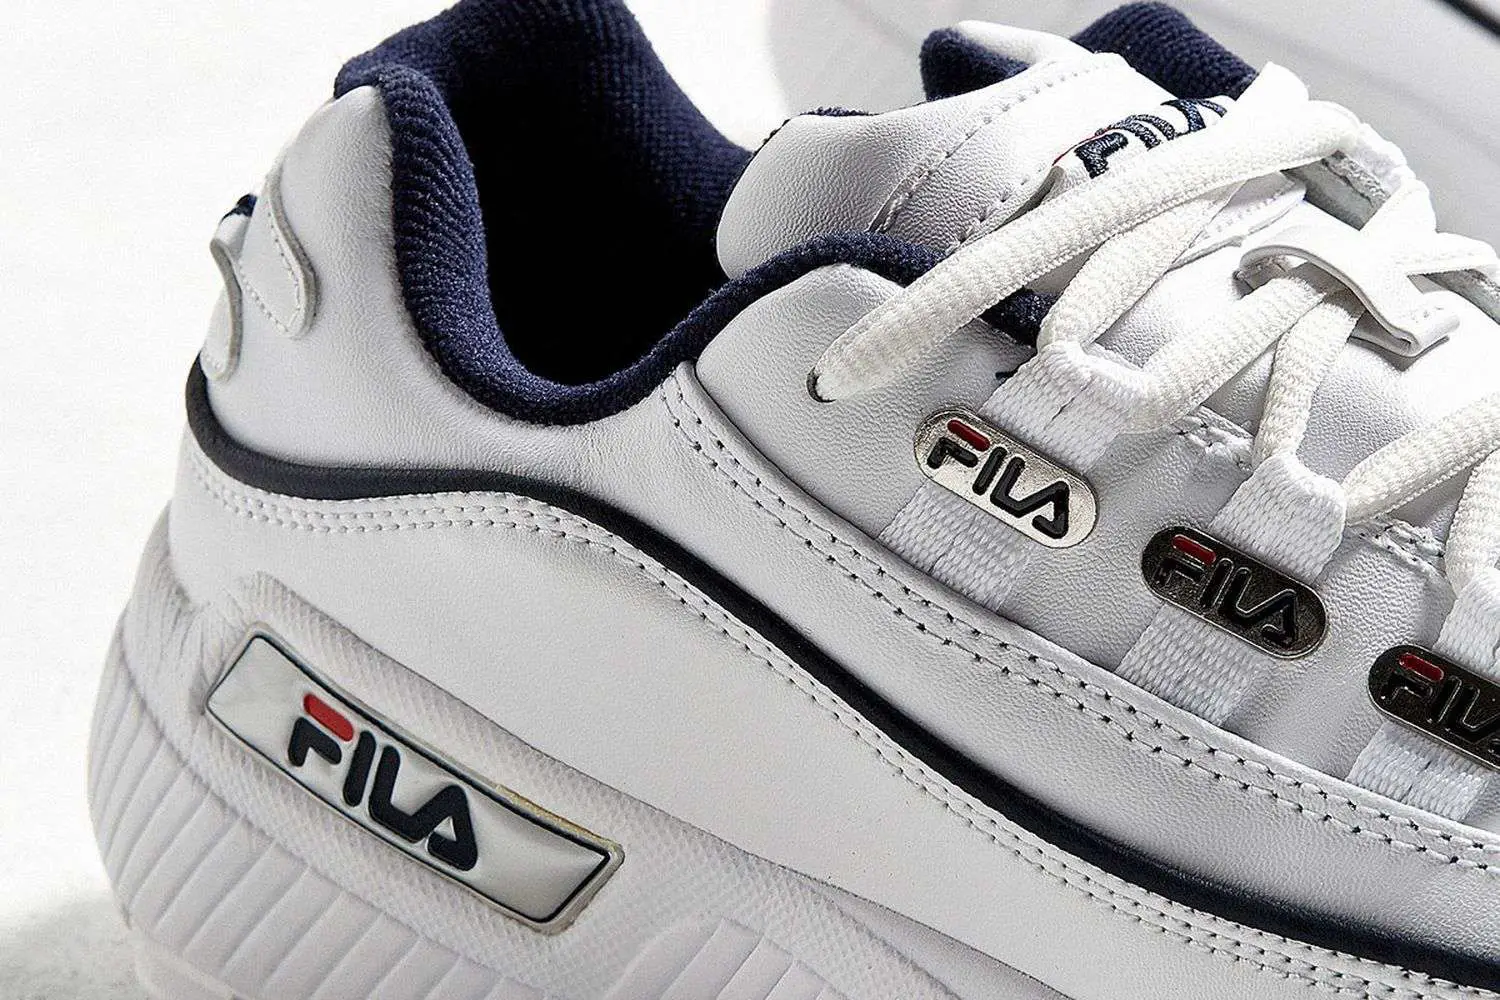 FILA Sneakers: Our 5 Favorites &  Where to Buy Online Right Now